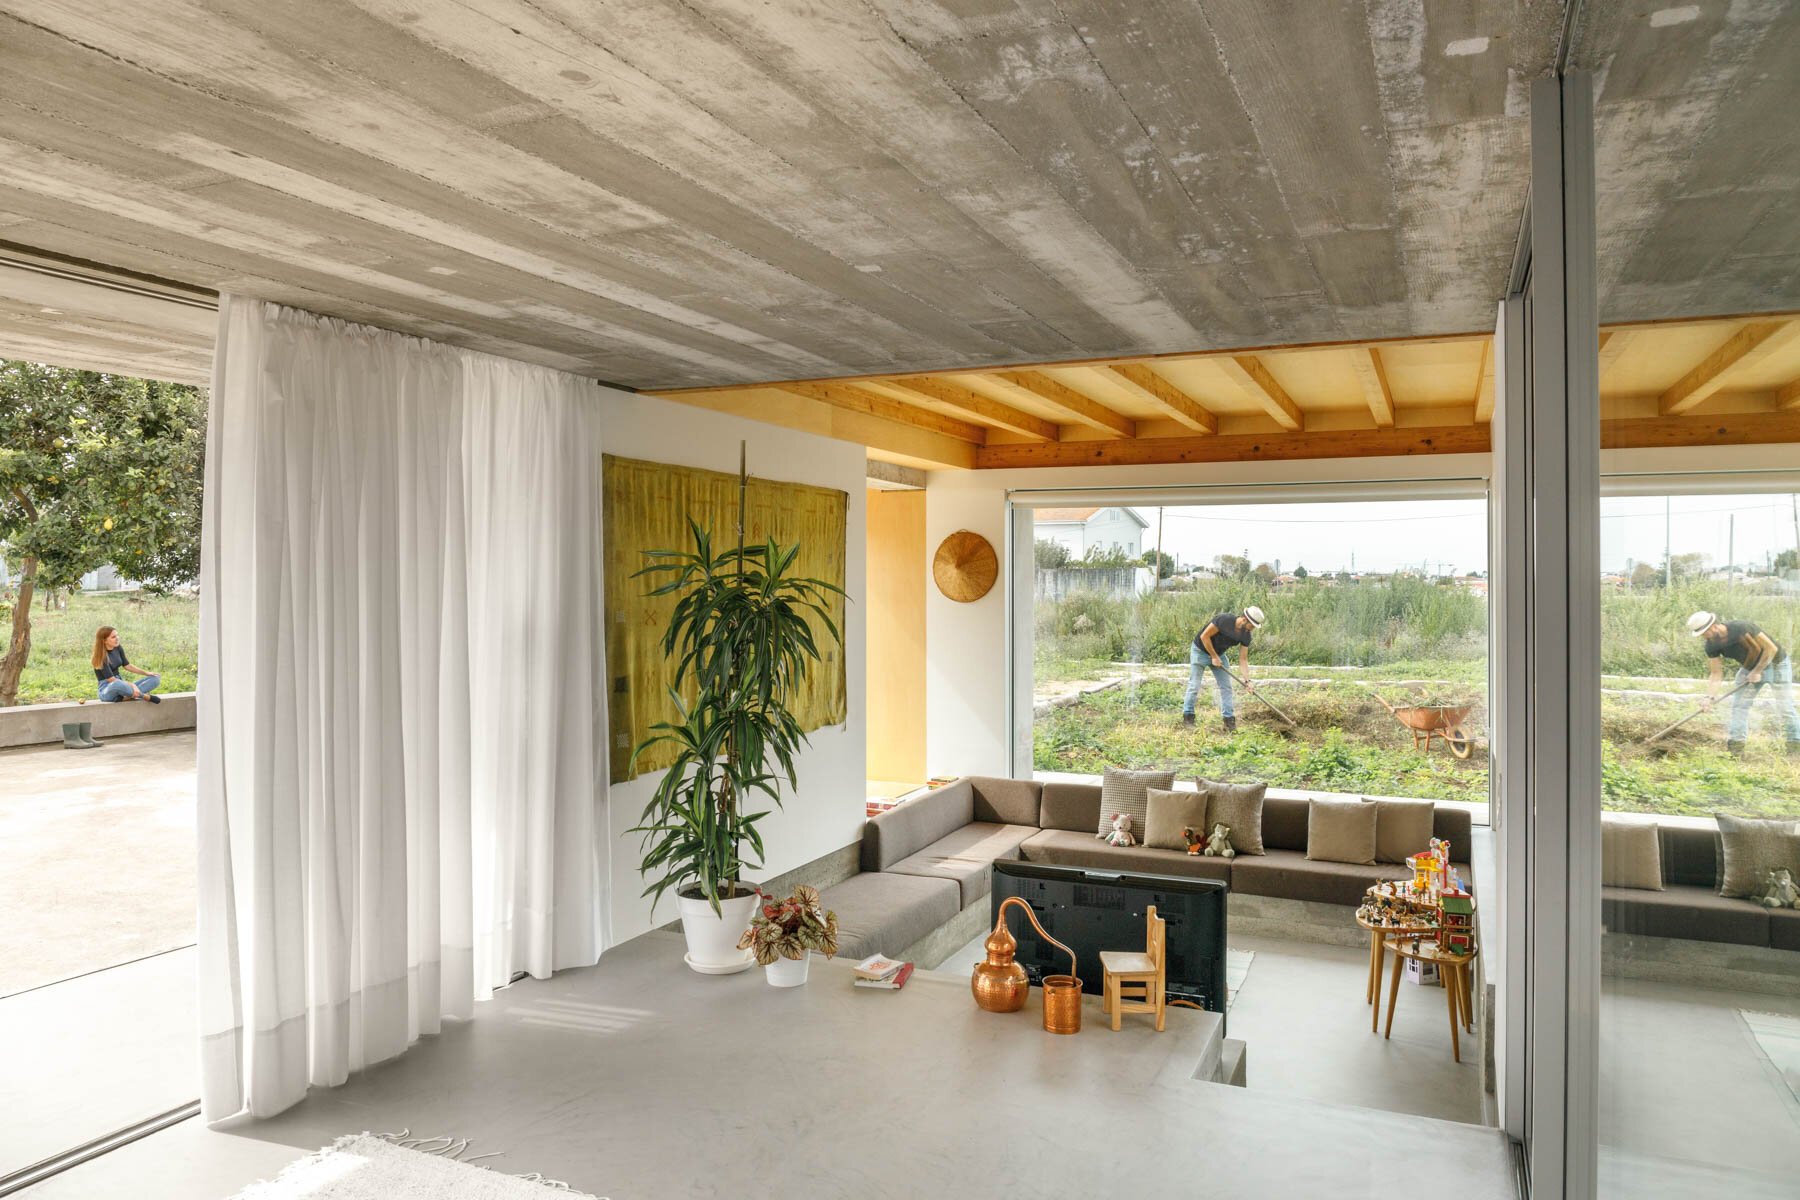 10 The space is also connected to outdoors a lot – there are glass walls